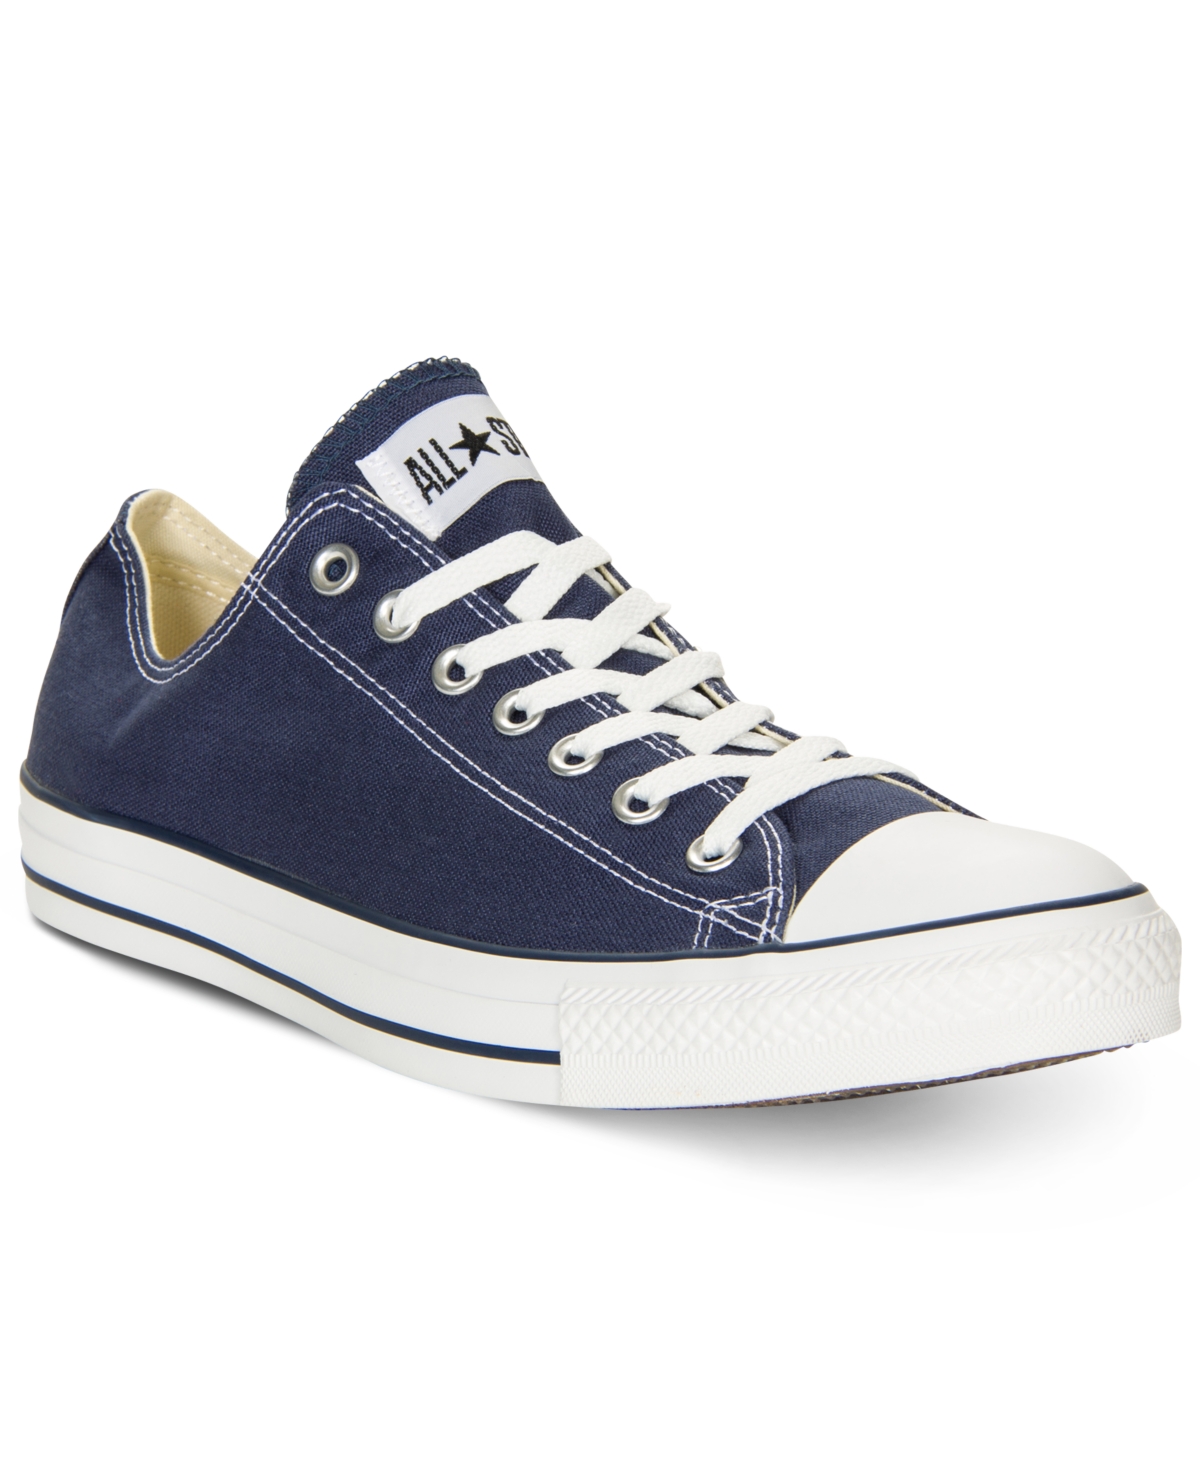 UPC 022859567053 product image for Converse Men's Chuck Taylor Low Top Sneakers from Finish Line | upcitemdb.com